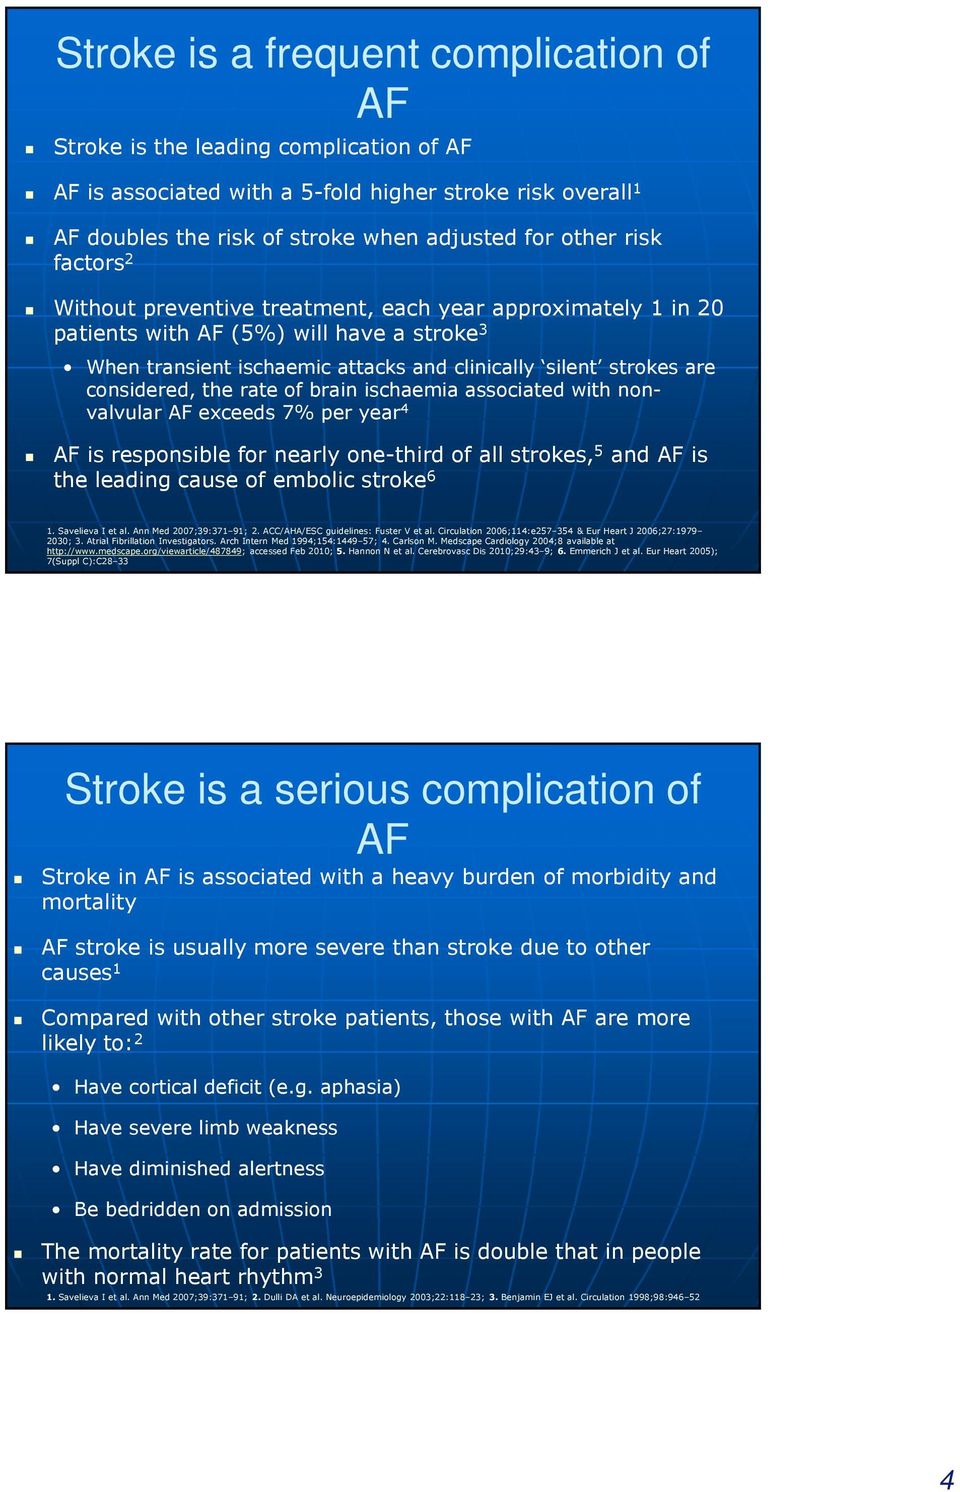 rate of brain ischaemia associated with nonvalvular AF exceeds 7% per year 4 AF is responsible for nearly one-third of all strokes, 5 and AF is the leading cause of embolic stroke 6 1.